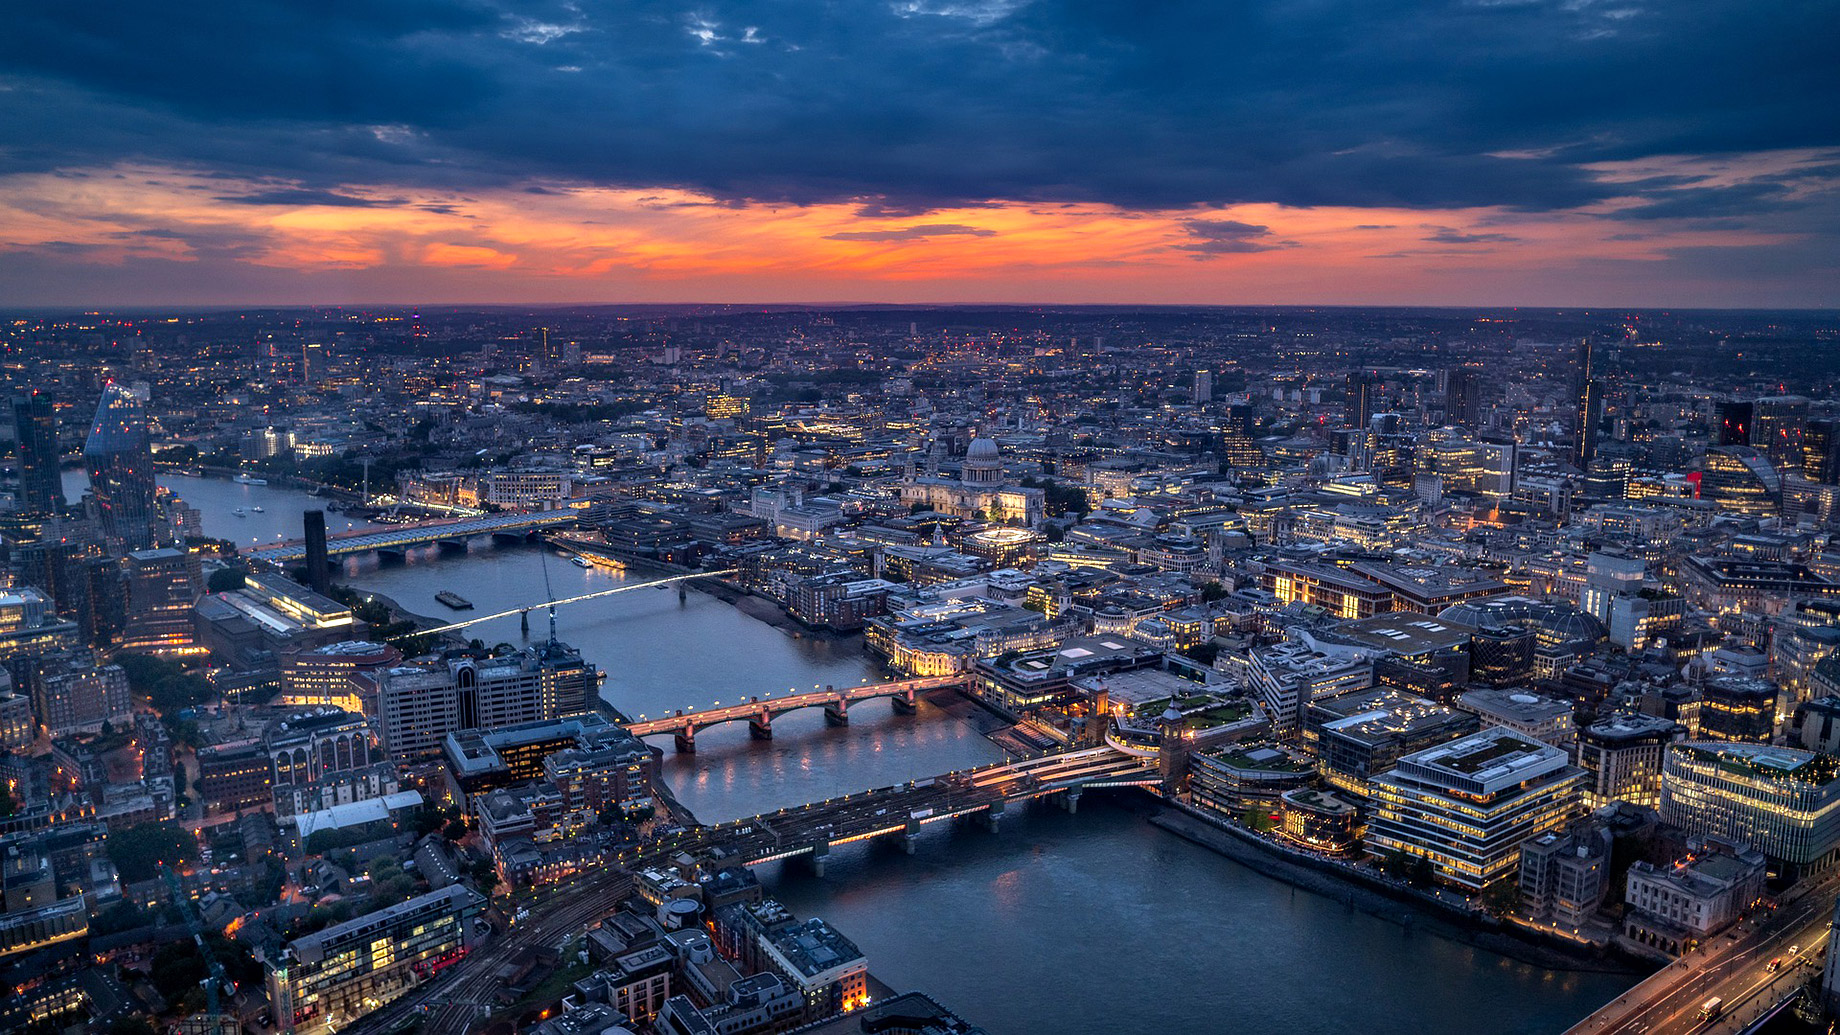 The City of London at Sunset